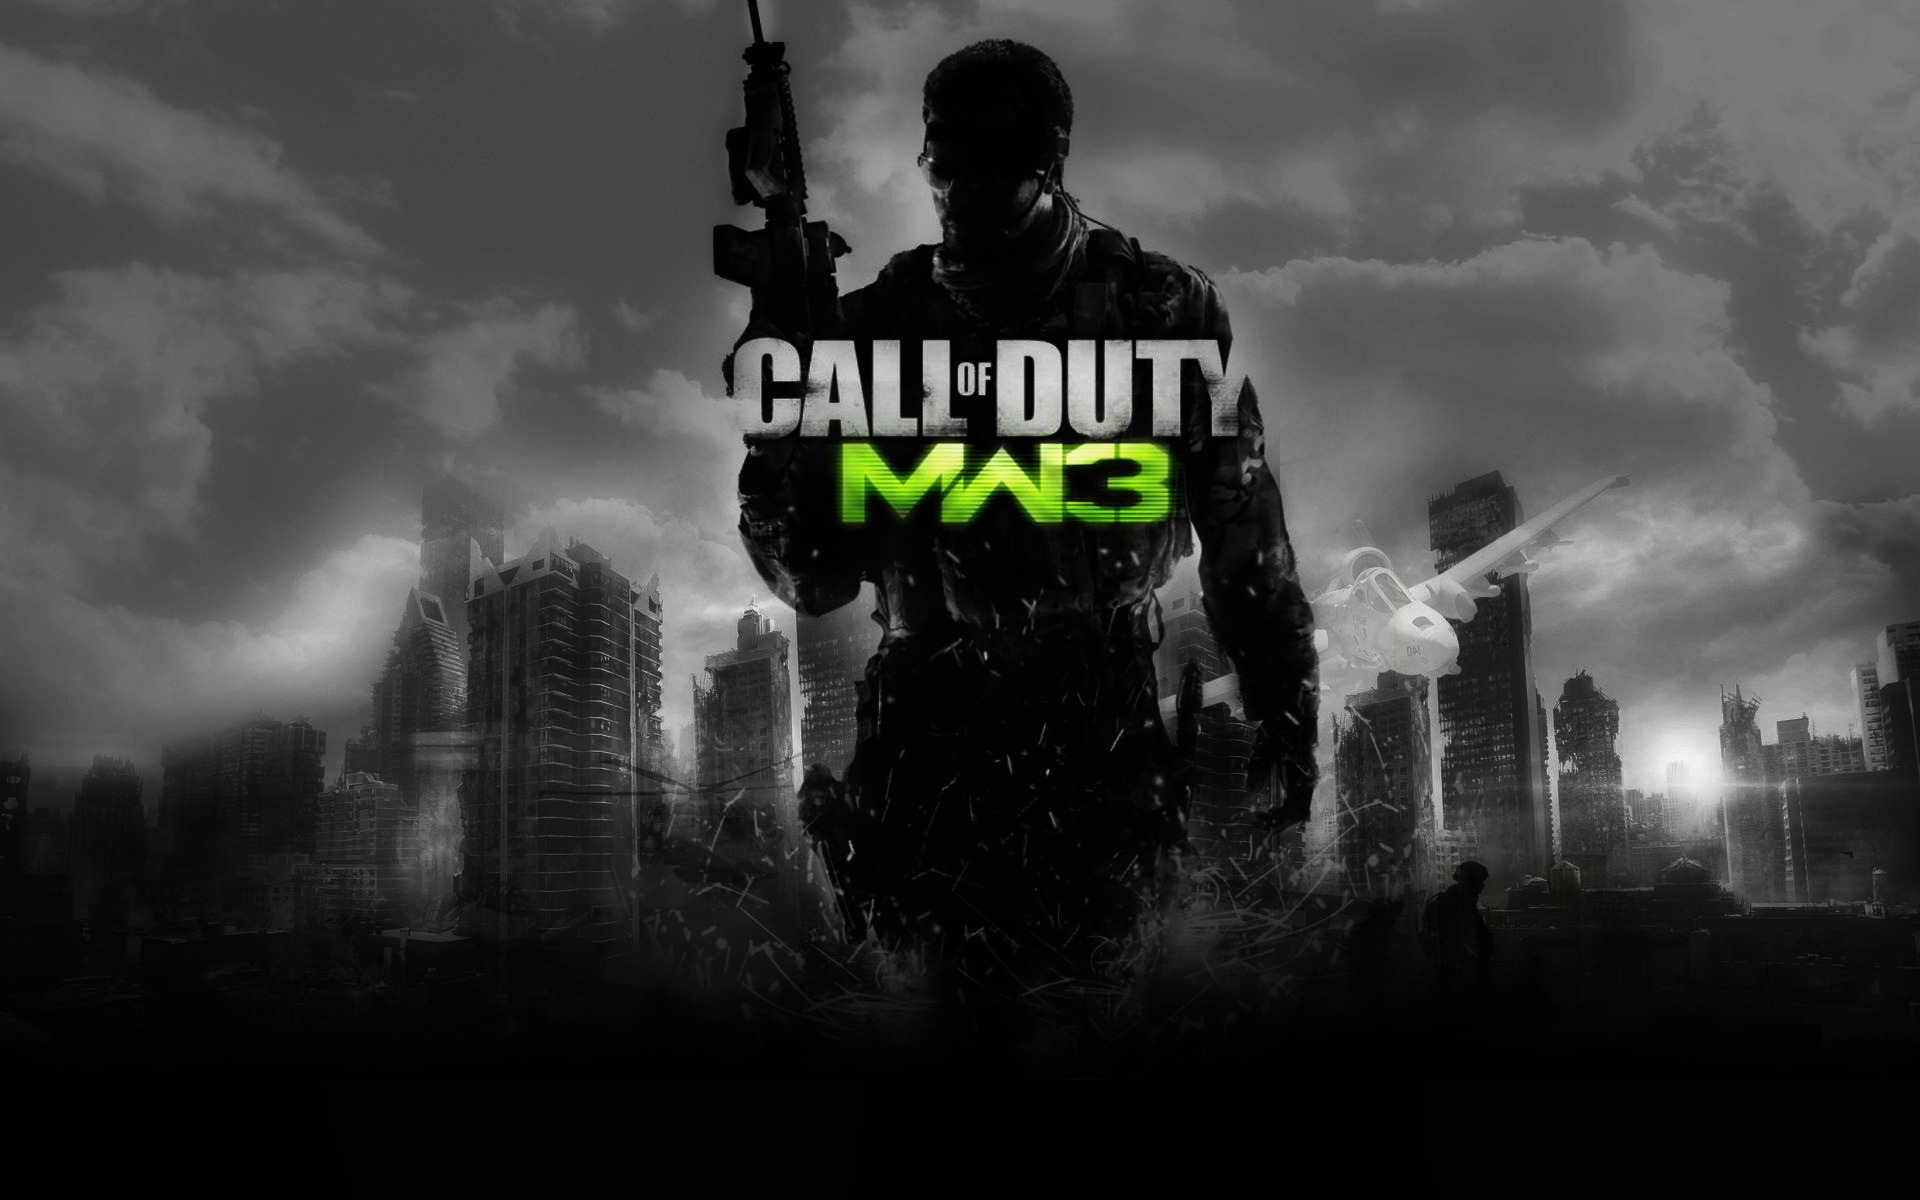 le-guide-des-soluces-call-of-duty-modern-warfare-3